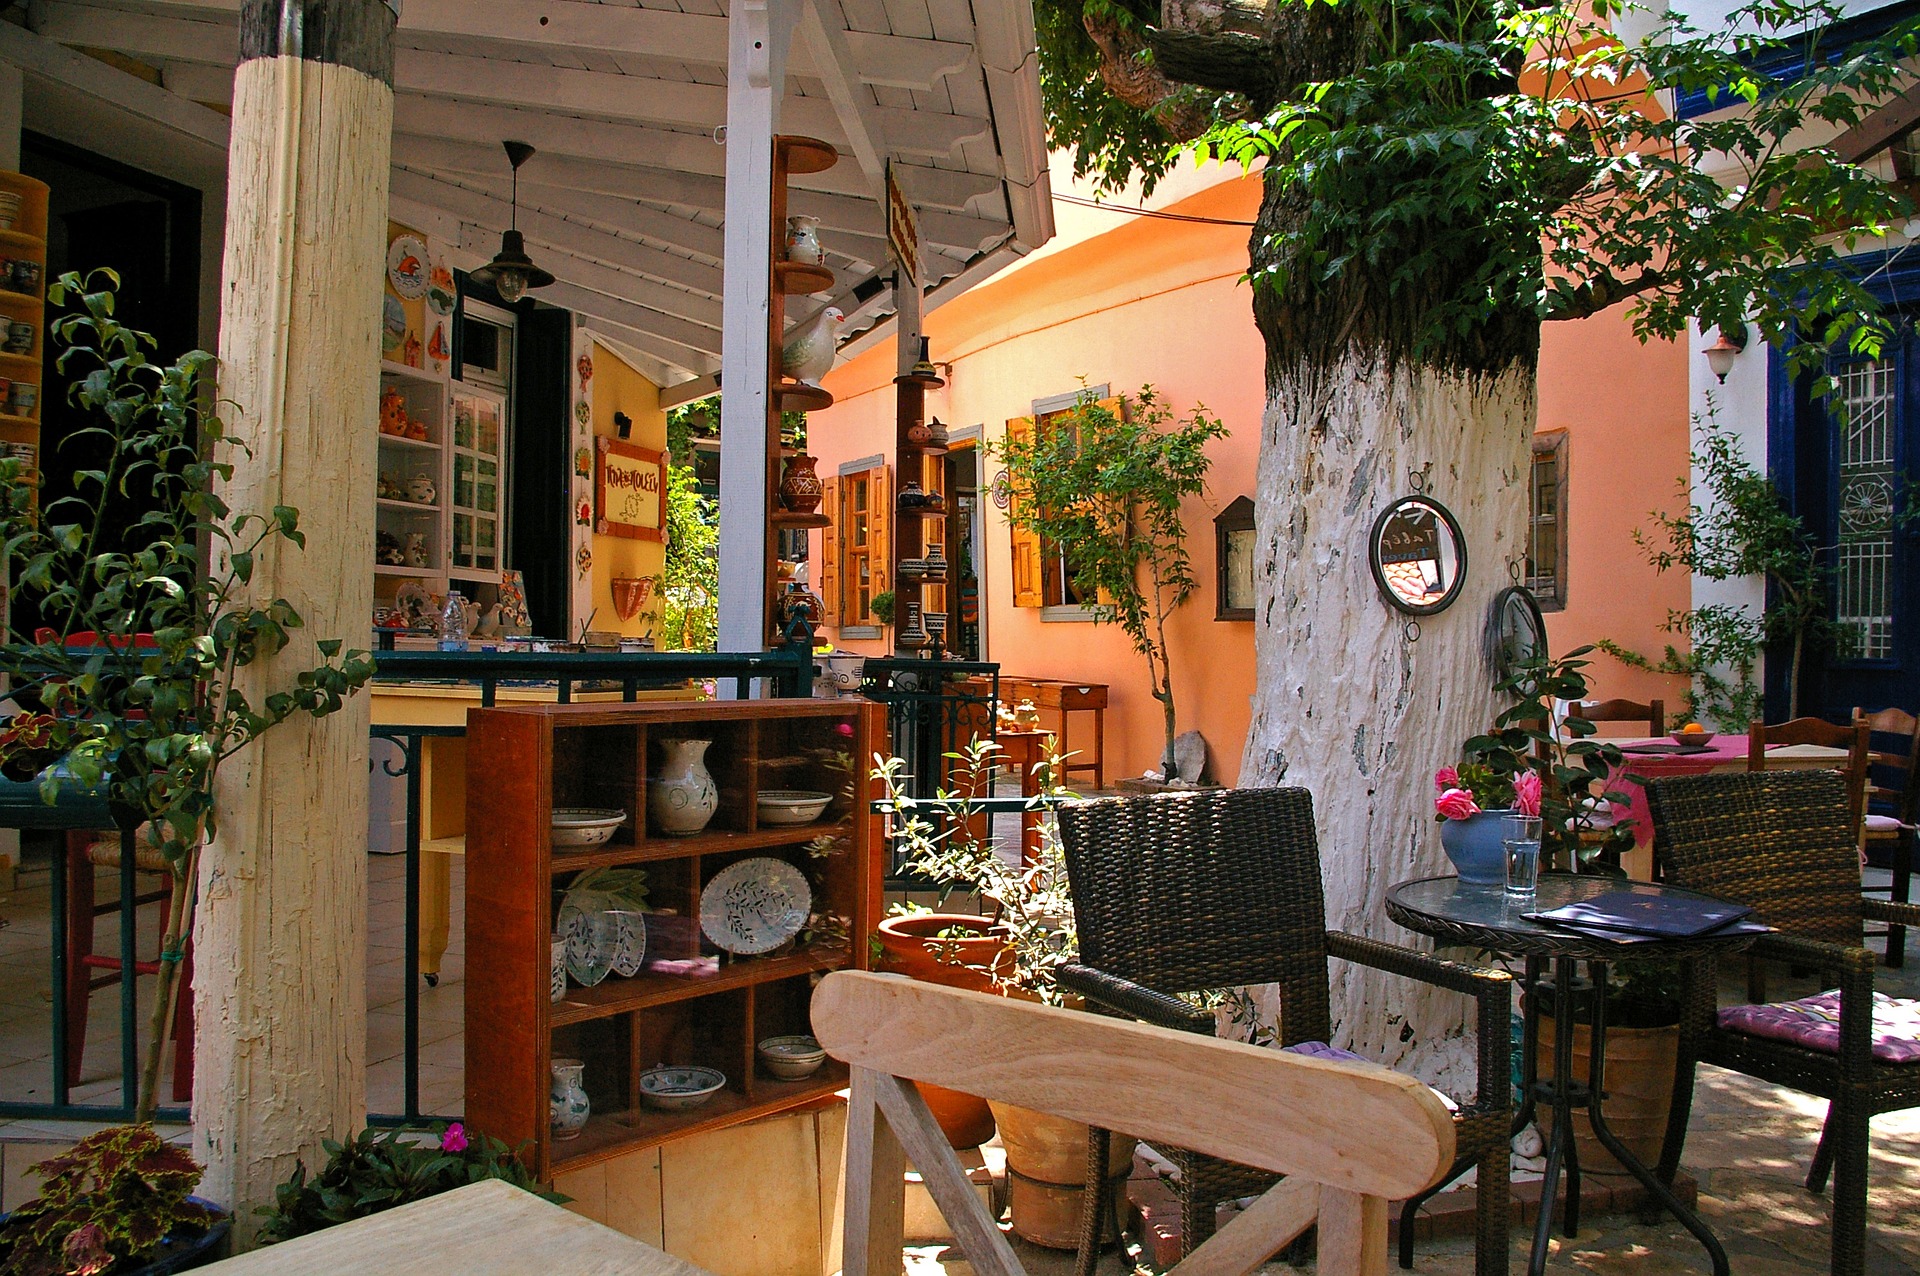 Jake and Telly's Catering: A photo of a covered, open-air patio on the Island of Samos. The patio is shaded by an open air roof and a large tree. Two tables are visible, along with three chairs, pottery on shelves and live potted trees and flowers. An orange wall is visible in the background.